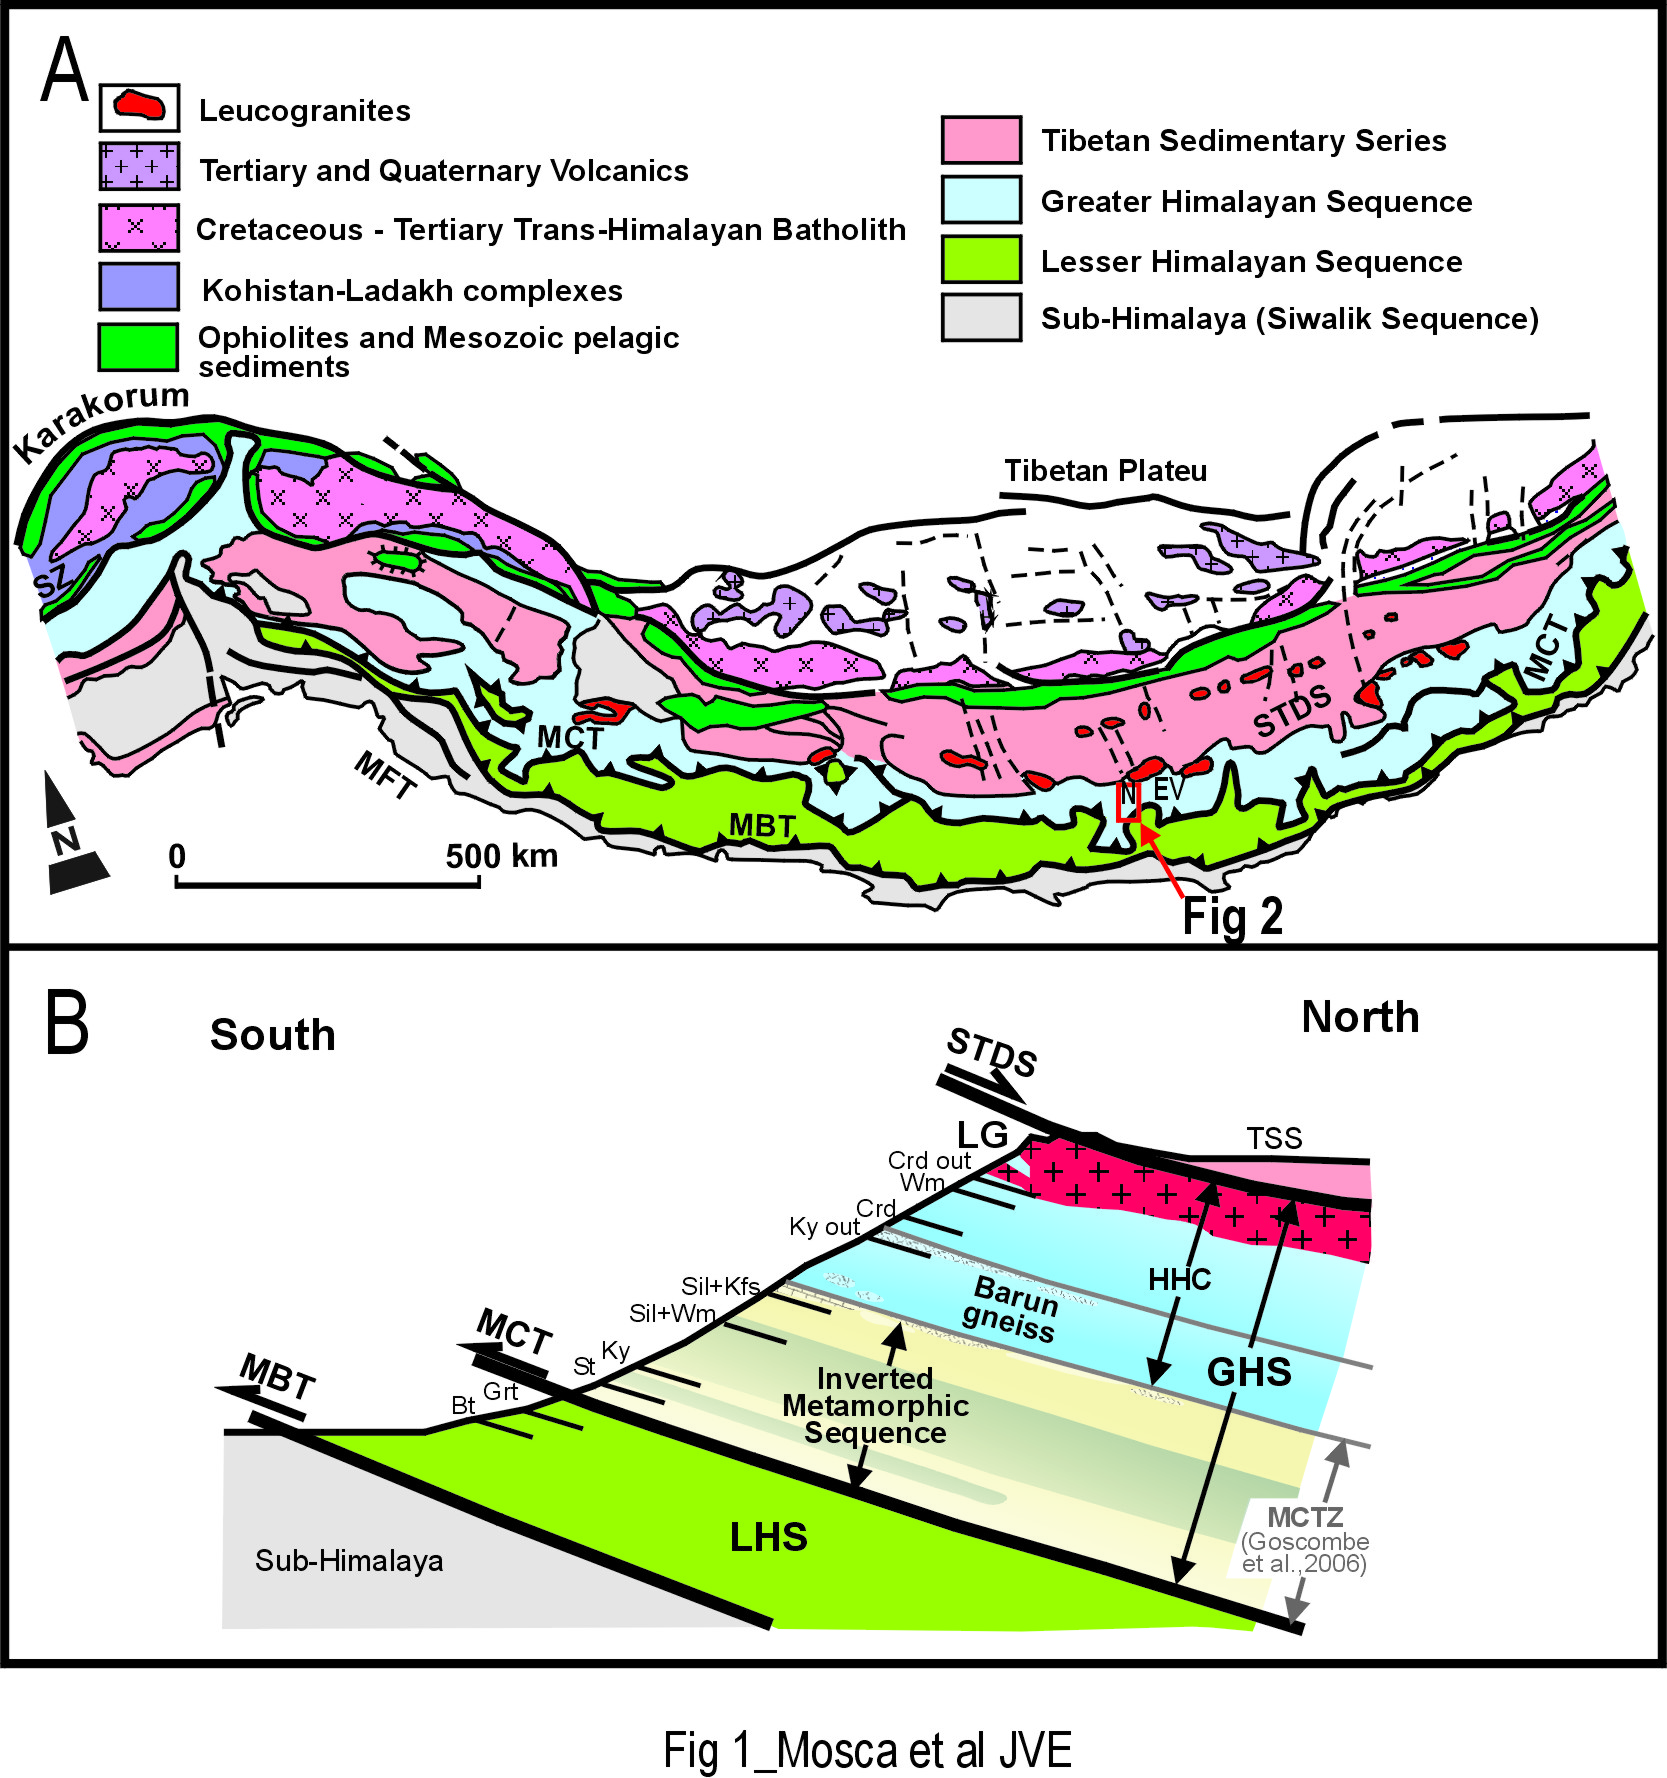 Tectonic sketch map of the Himalaya and schematic cross-section